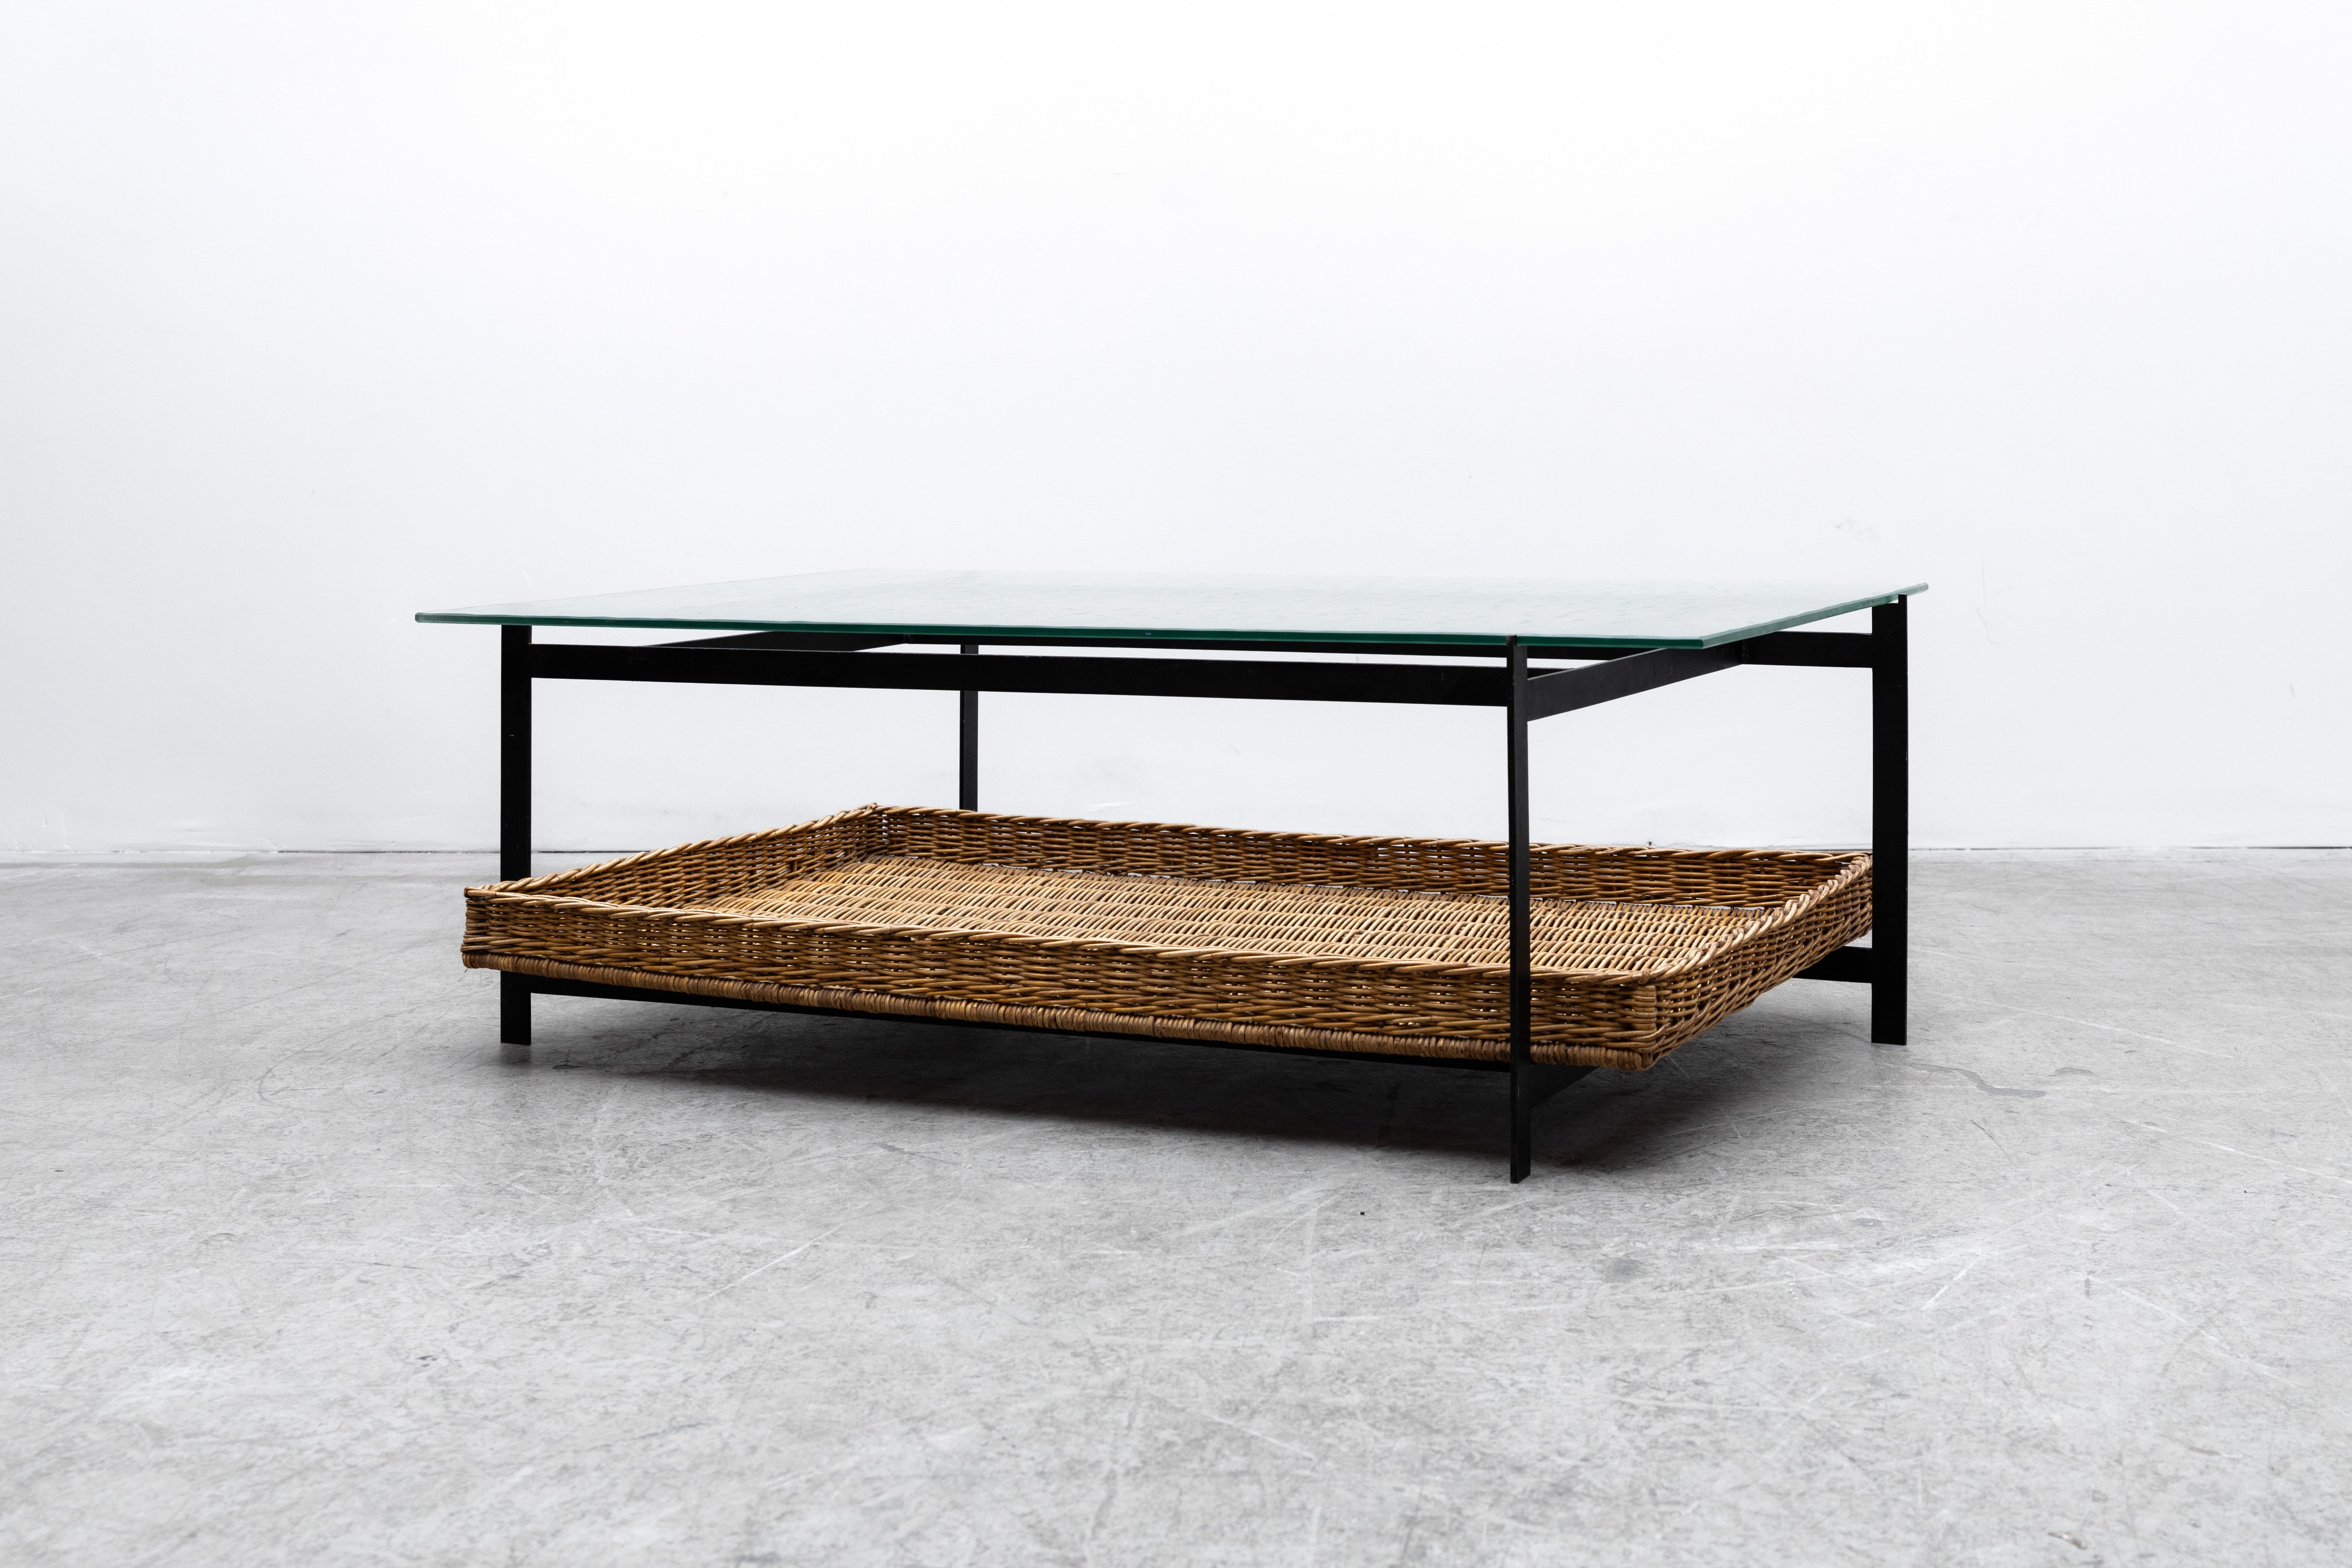 Poul Kjaerholm inspired Dutch coffee table with rattan woven basket and black enameled metal frame. In original condition with some visible scratching to glass top and enamel loss consistent with age and use.